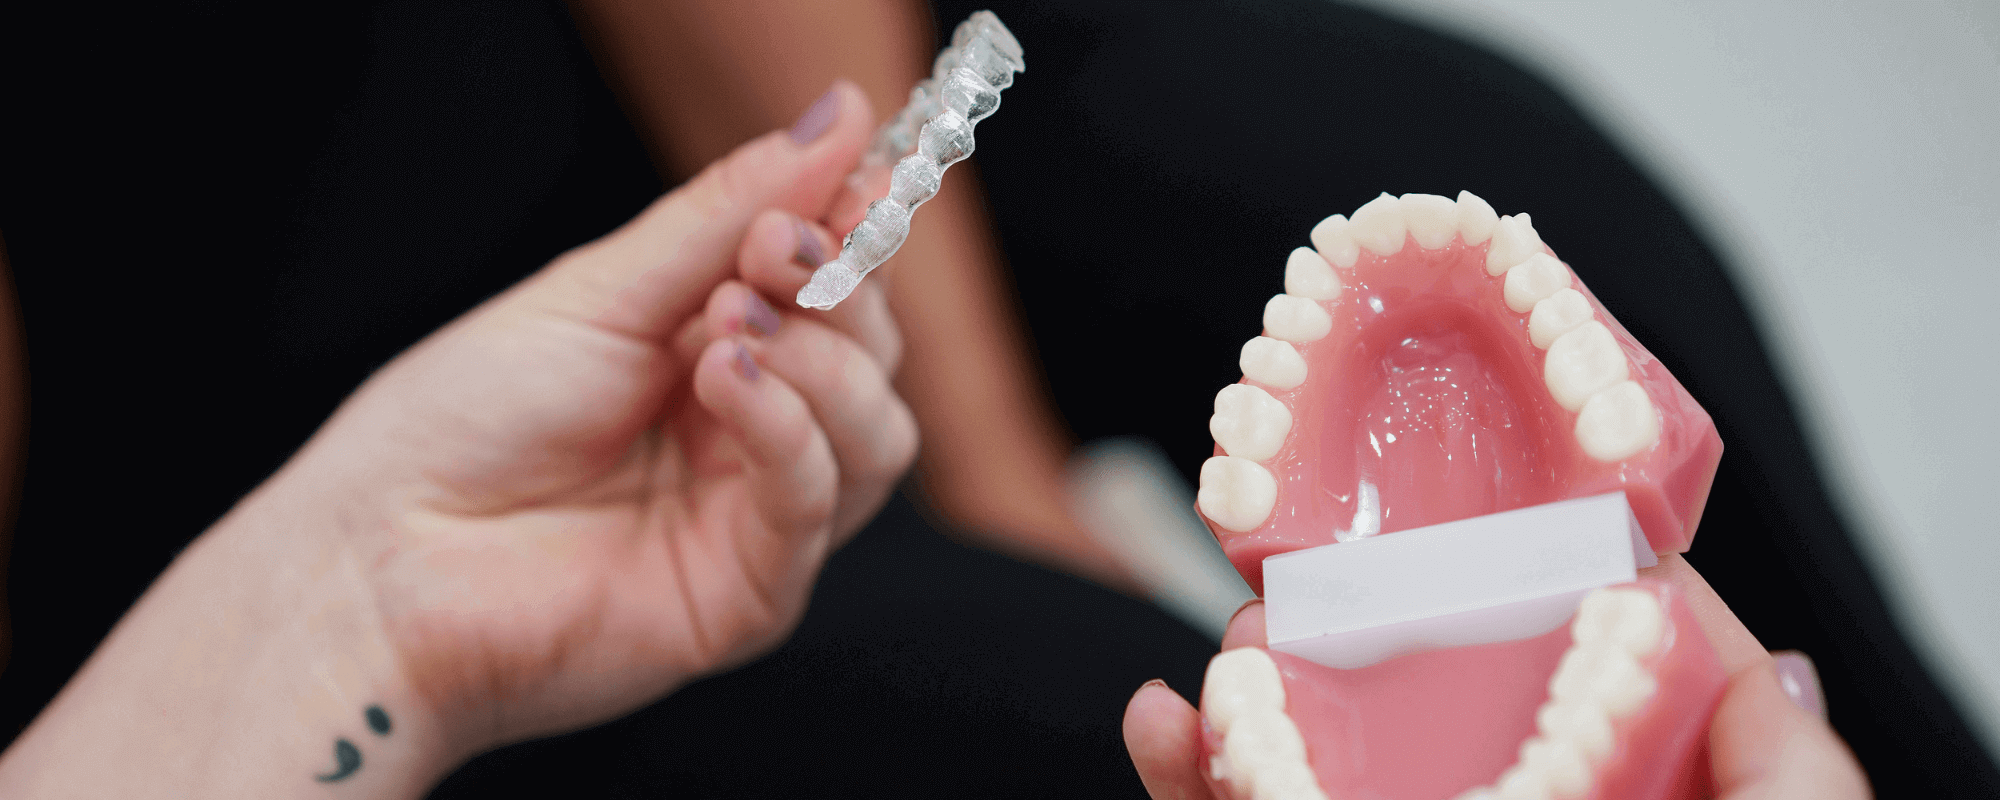 Invisalign aligners being put onto a dental model during Invisalign consultation